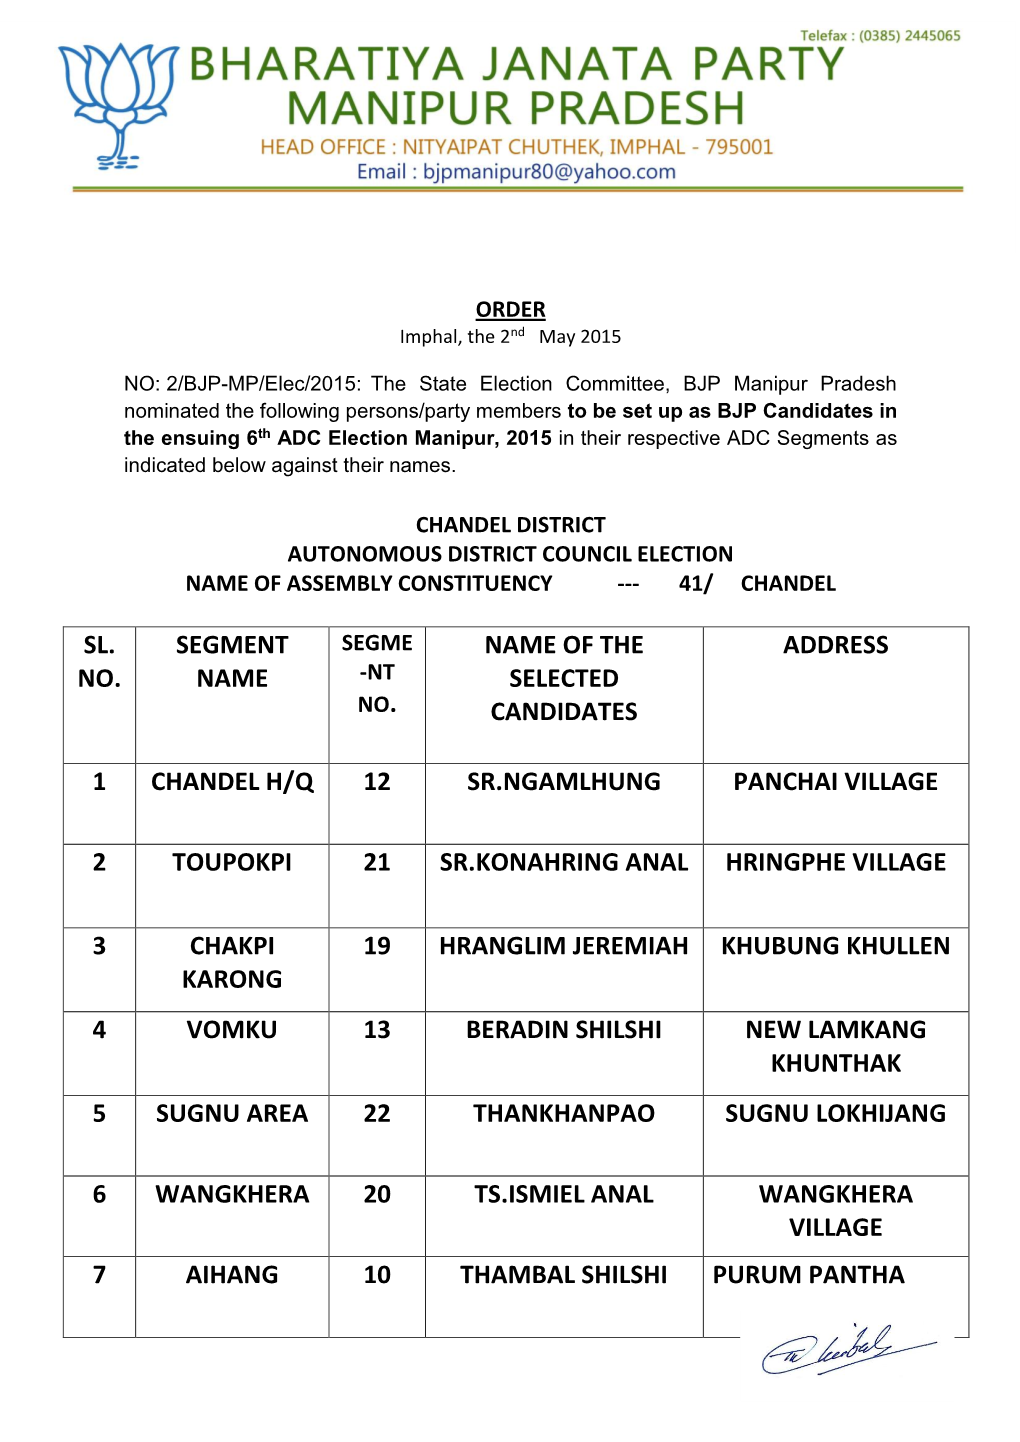 Sl. No. Segment Name Name of the Selected Candidates